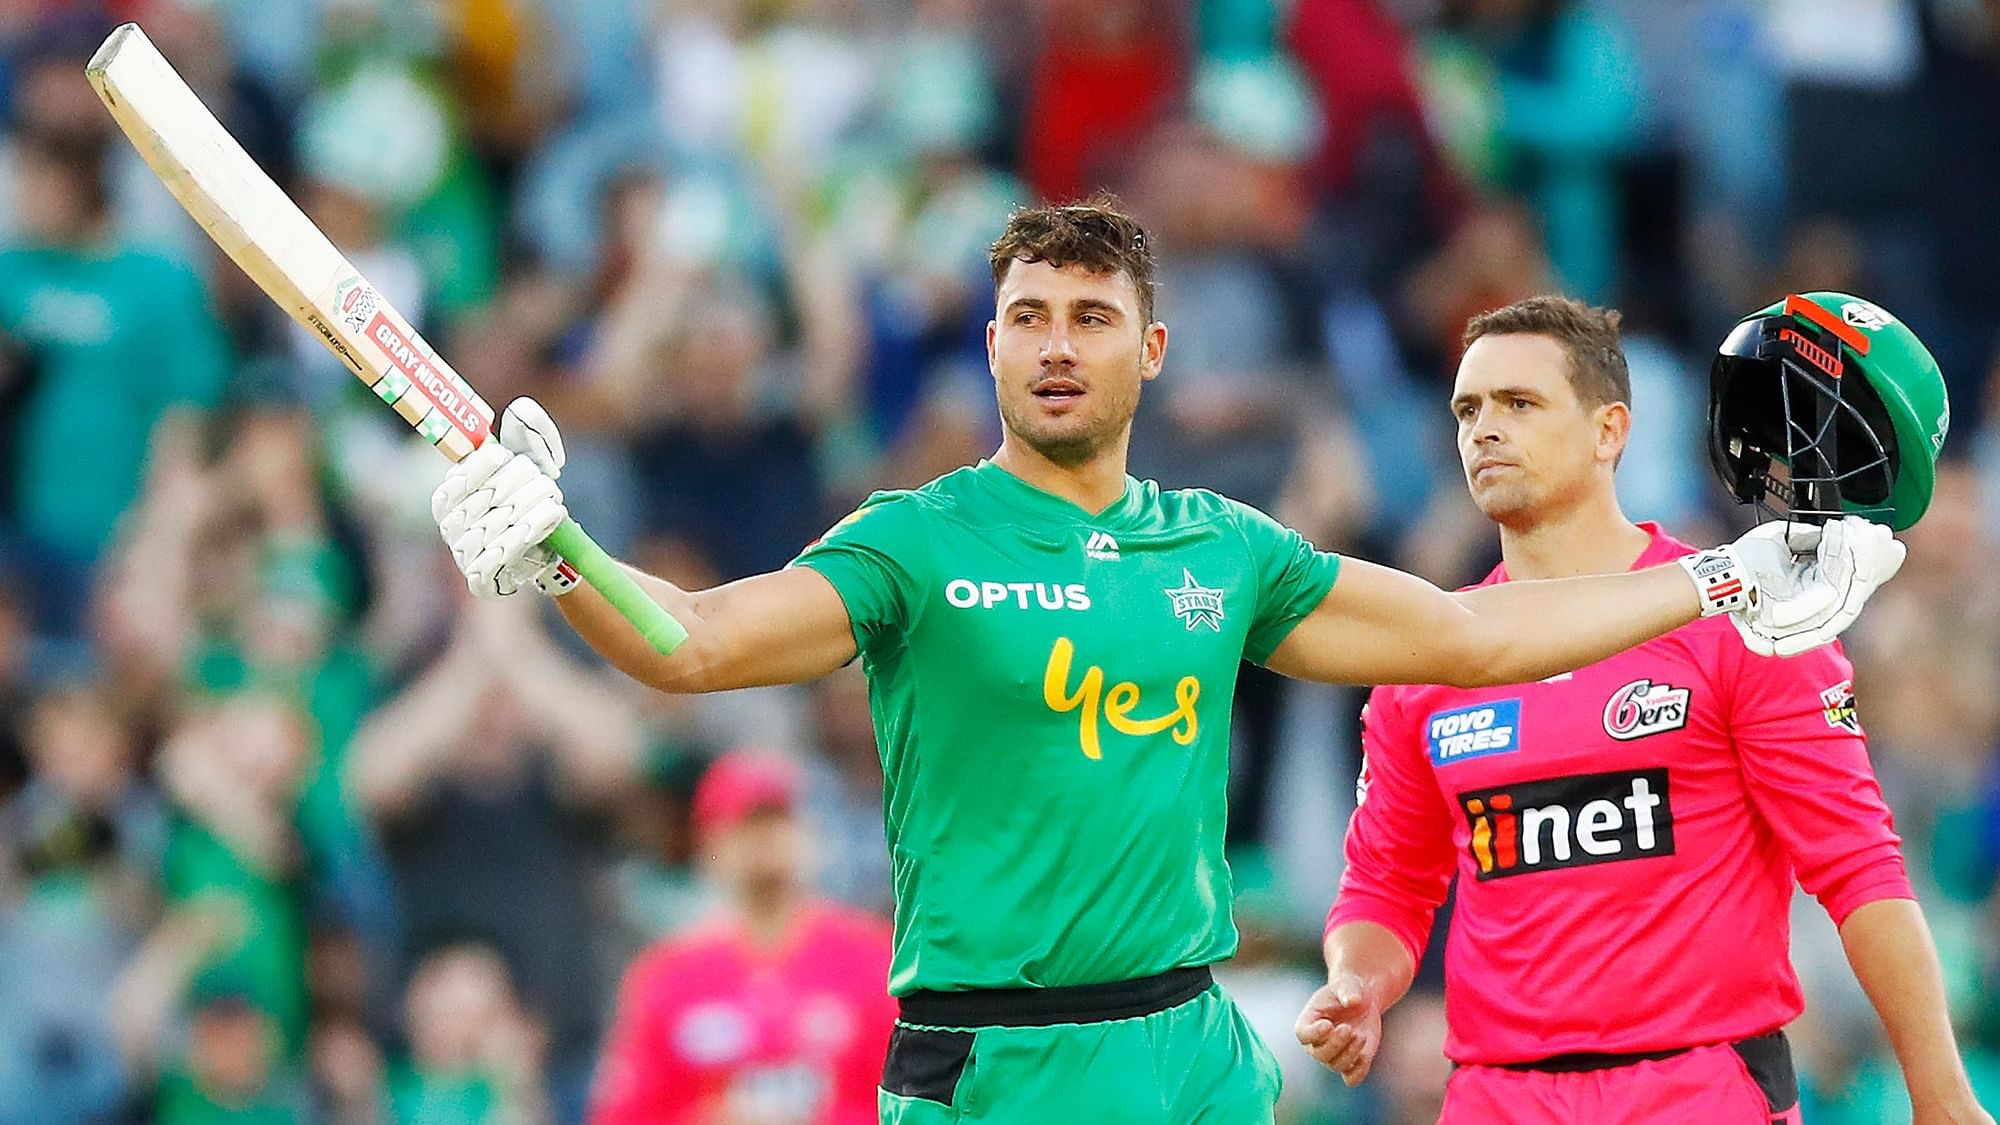 Melbourne Stars’ opener Marcus Stoinis scored 79-ball 147 during his team’s Big Bash League (BBL) encounter against Sydney Sixers at the Melbourne Cricket Ground (MCG).